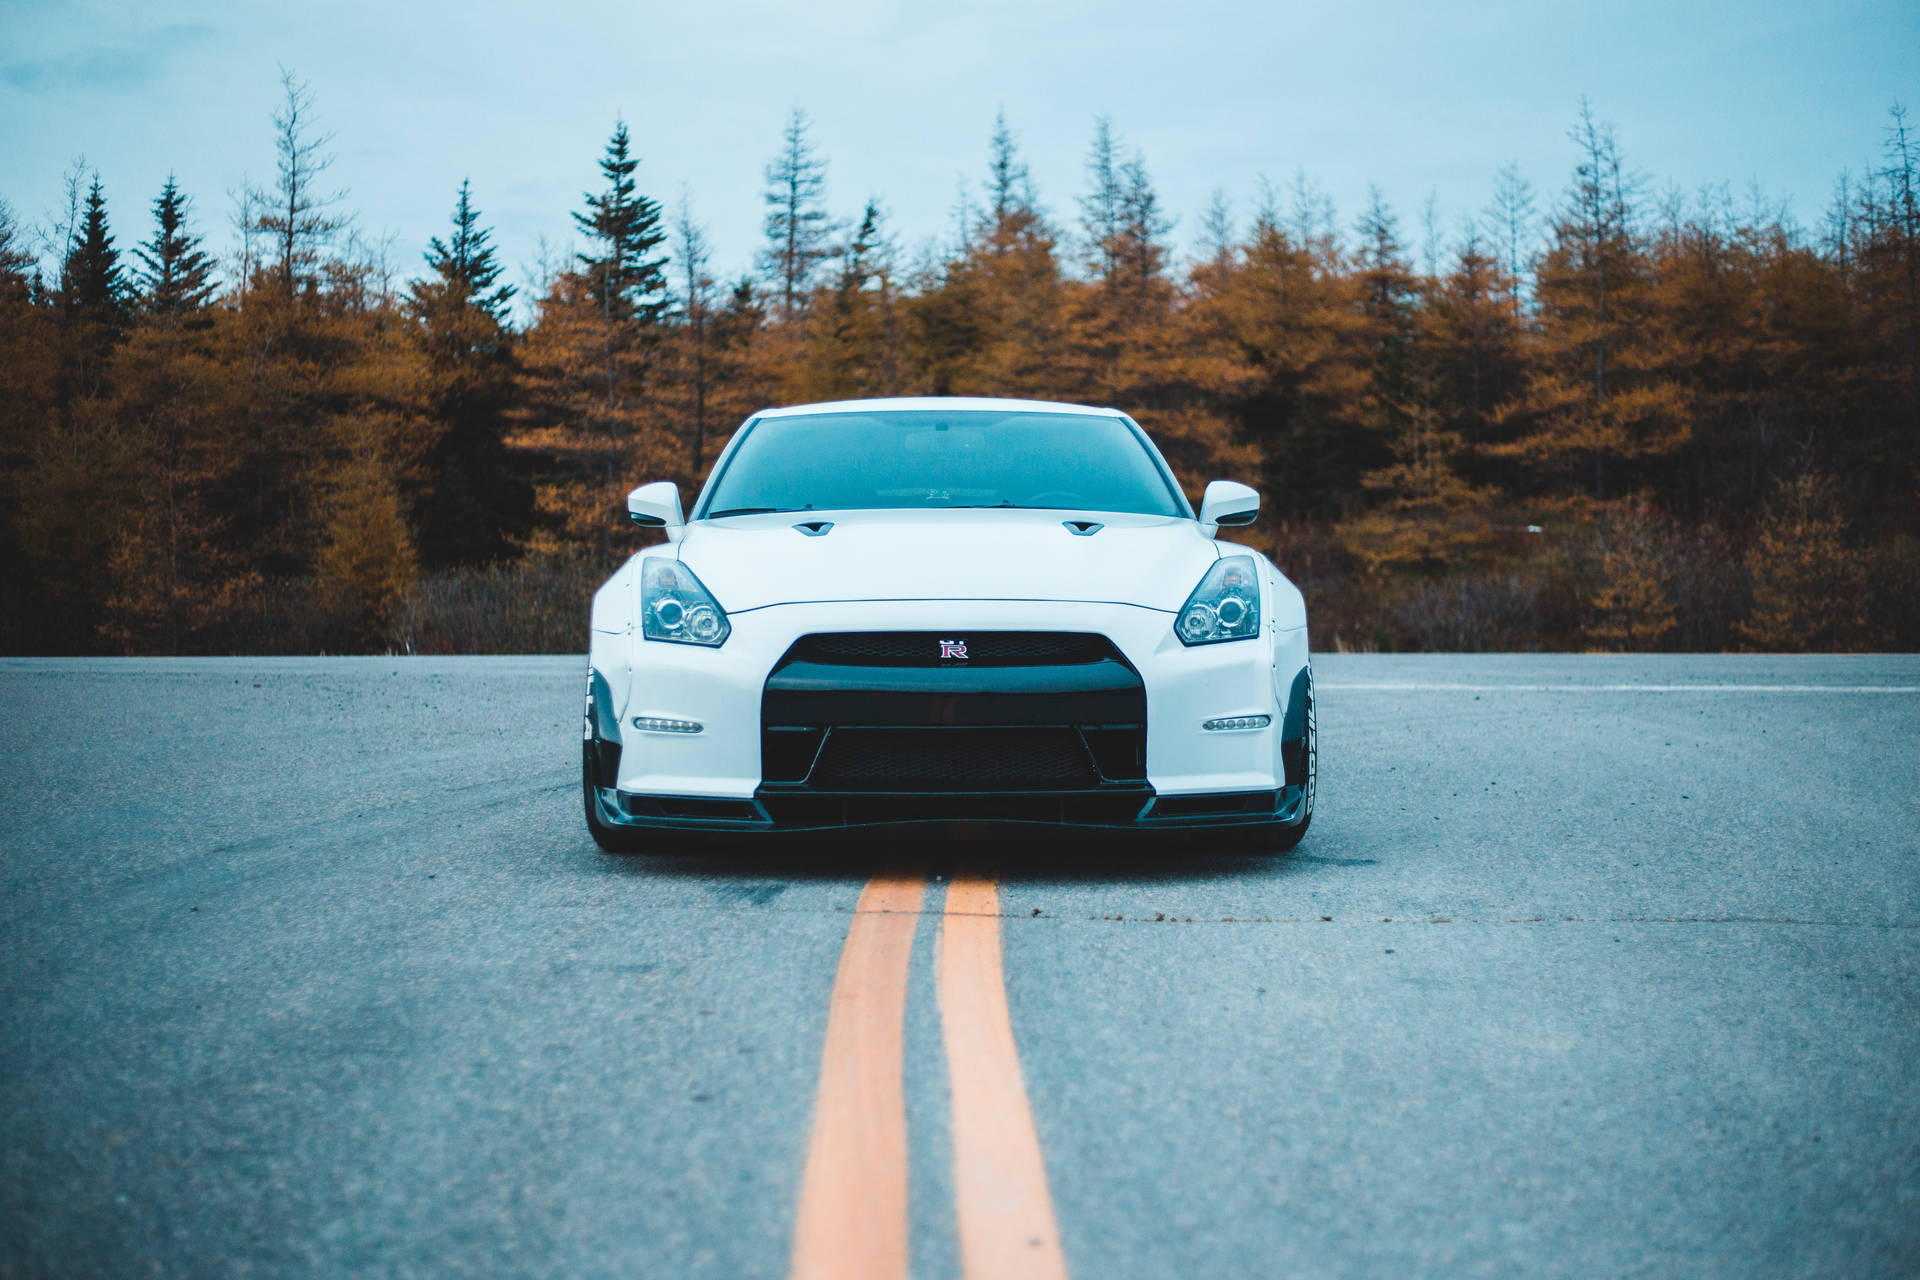 Free Nissan Gt R Wallpaper Downloads, [200+] Nissan Gt R Wallpapers for  FREE 